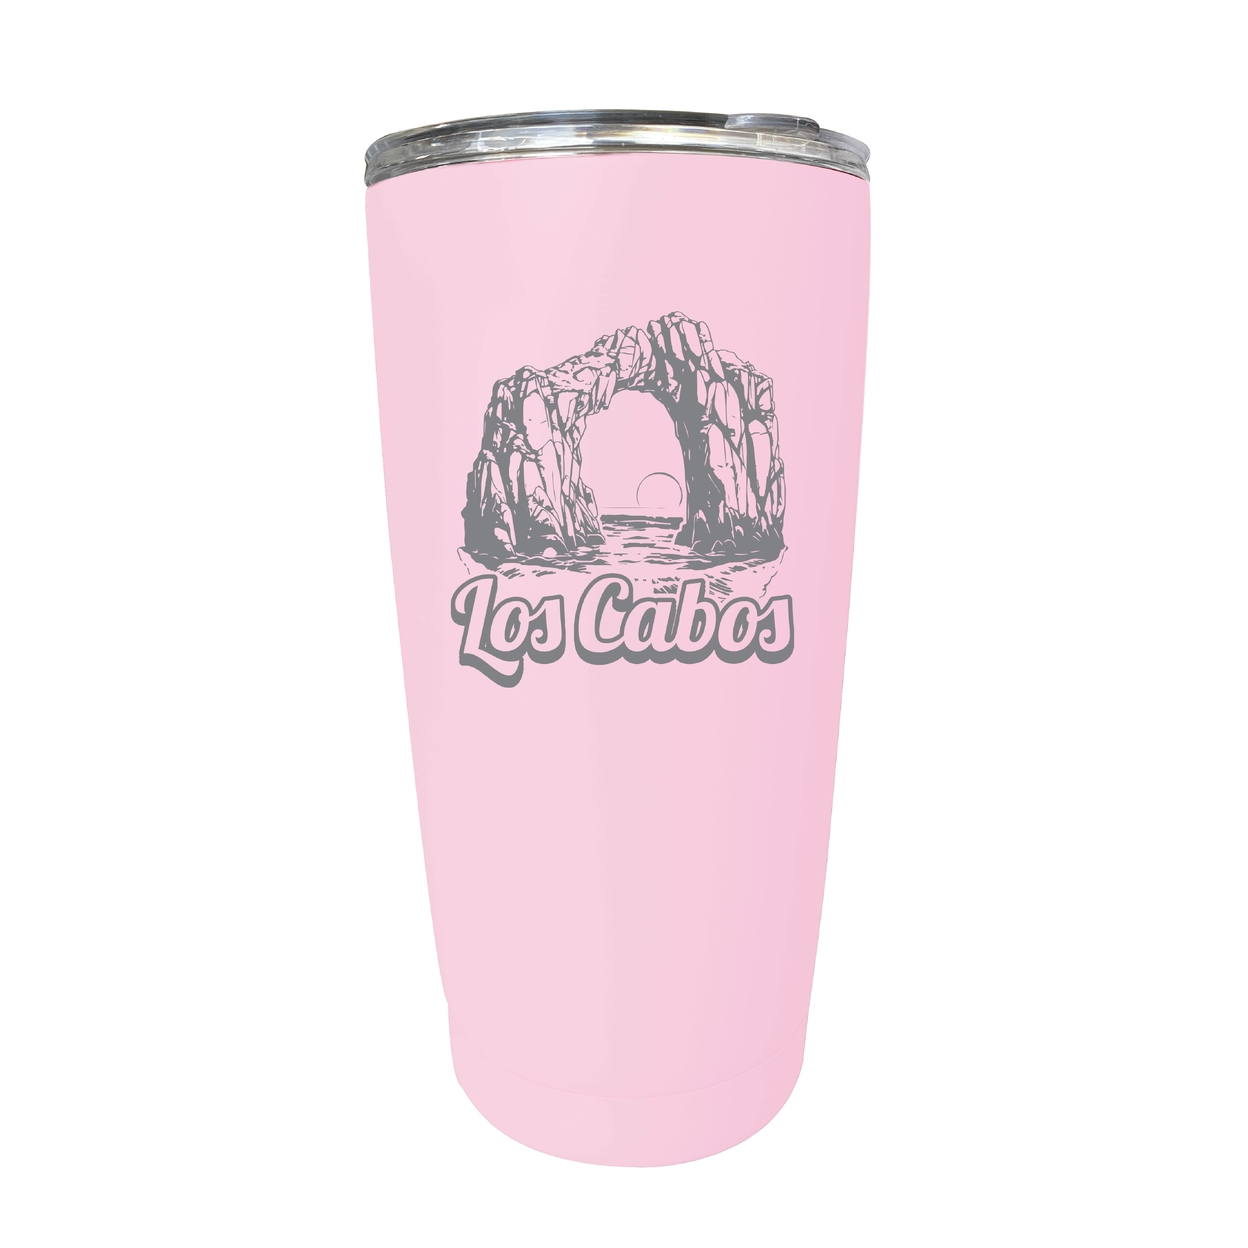 Los Cabos Mexico Souvenir 16 Oz Engraved Stainless Steel Insulated Tumbler - Pink,,Single Unit